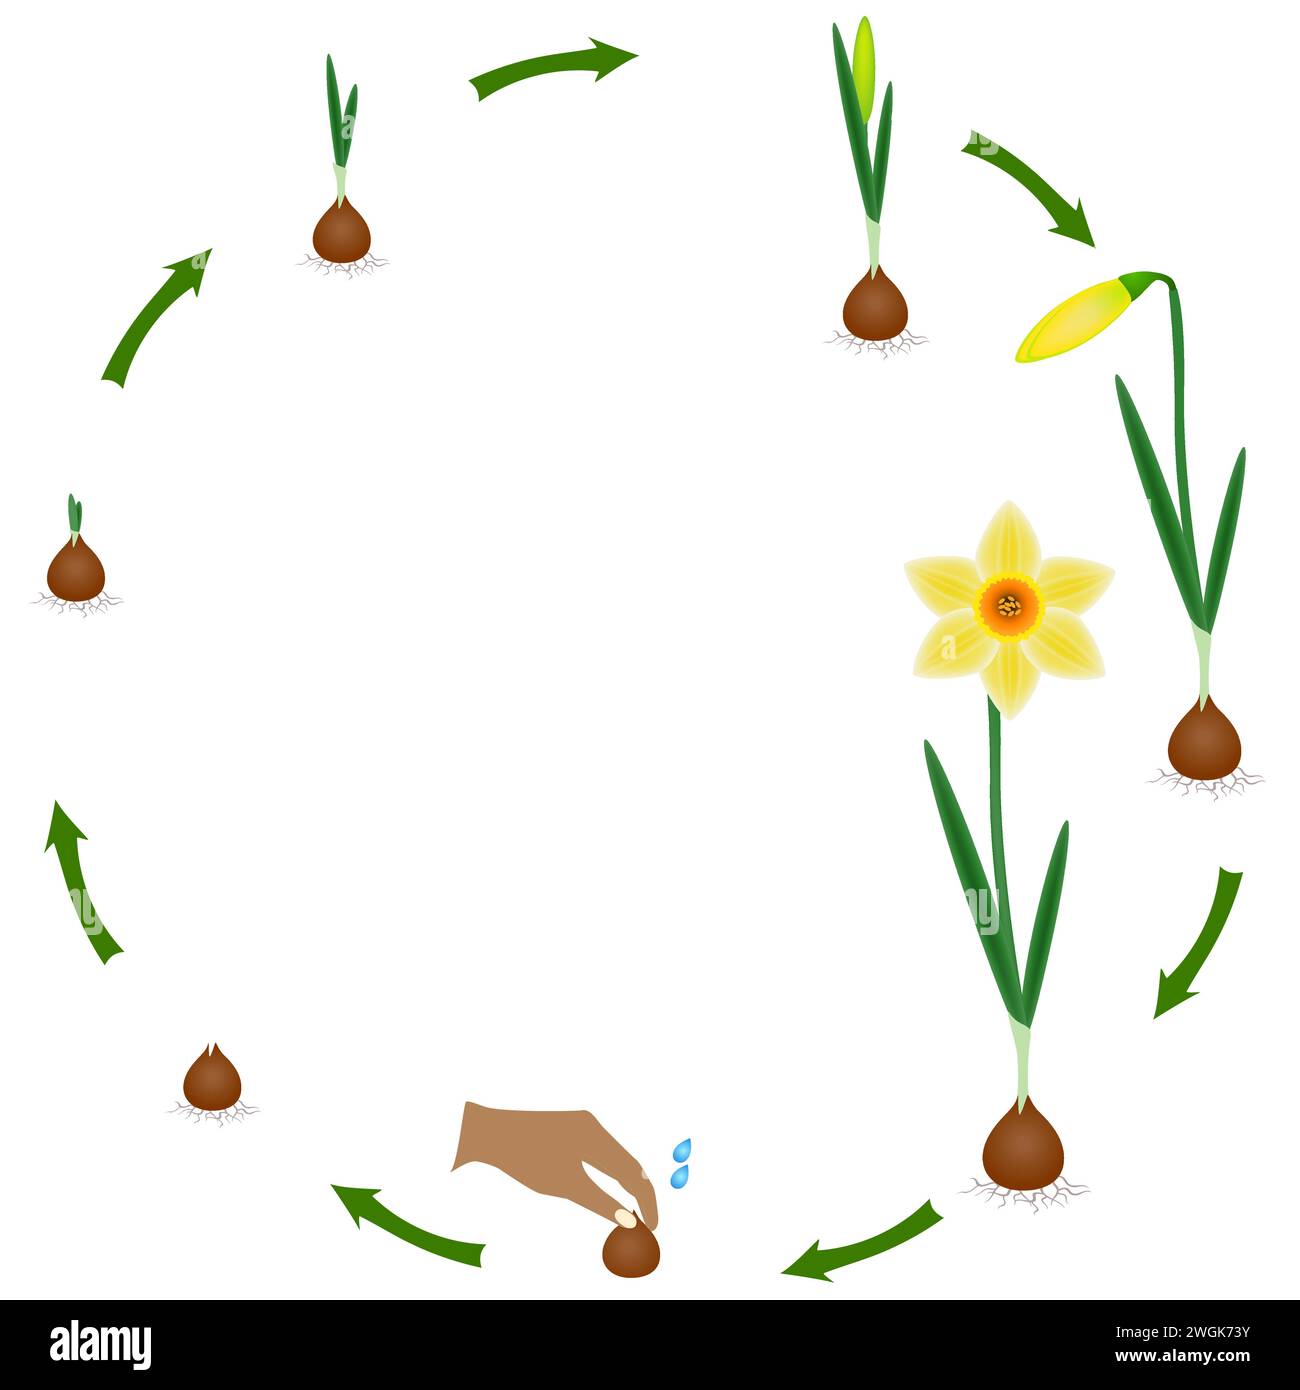 Life cycle of a narcissus plant on a white background. Stock Vector